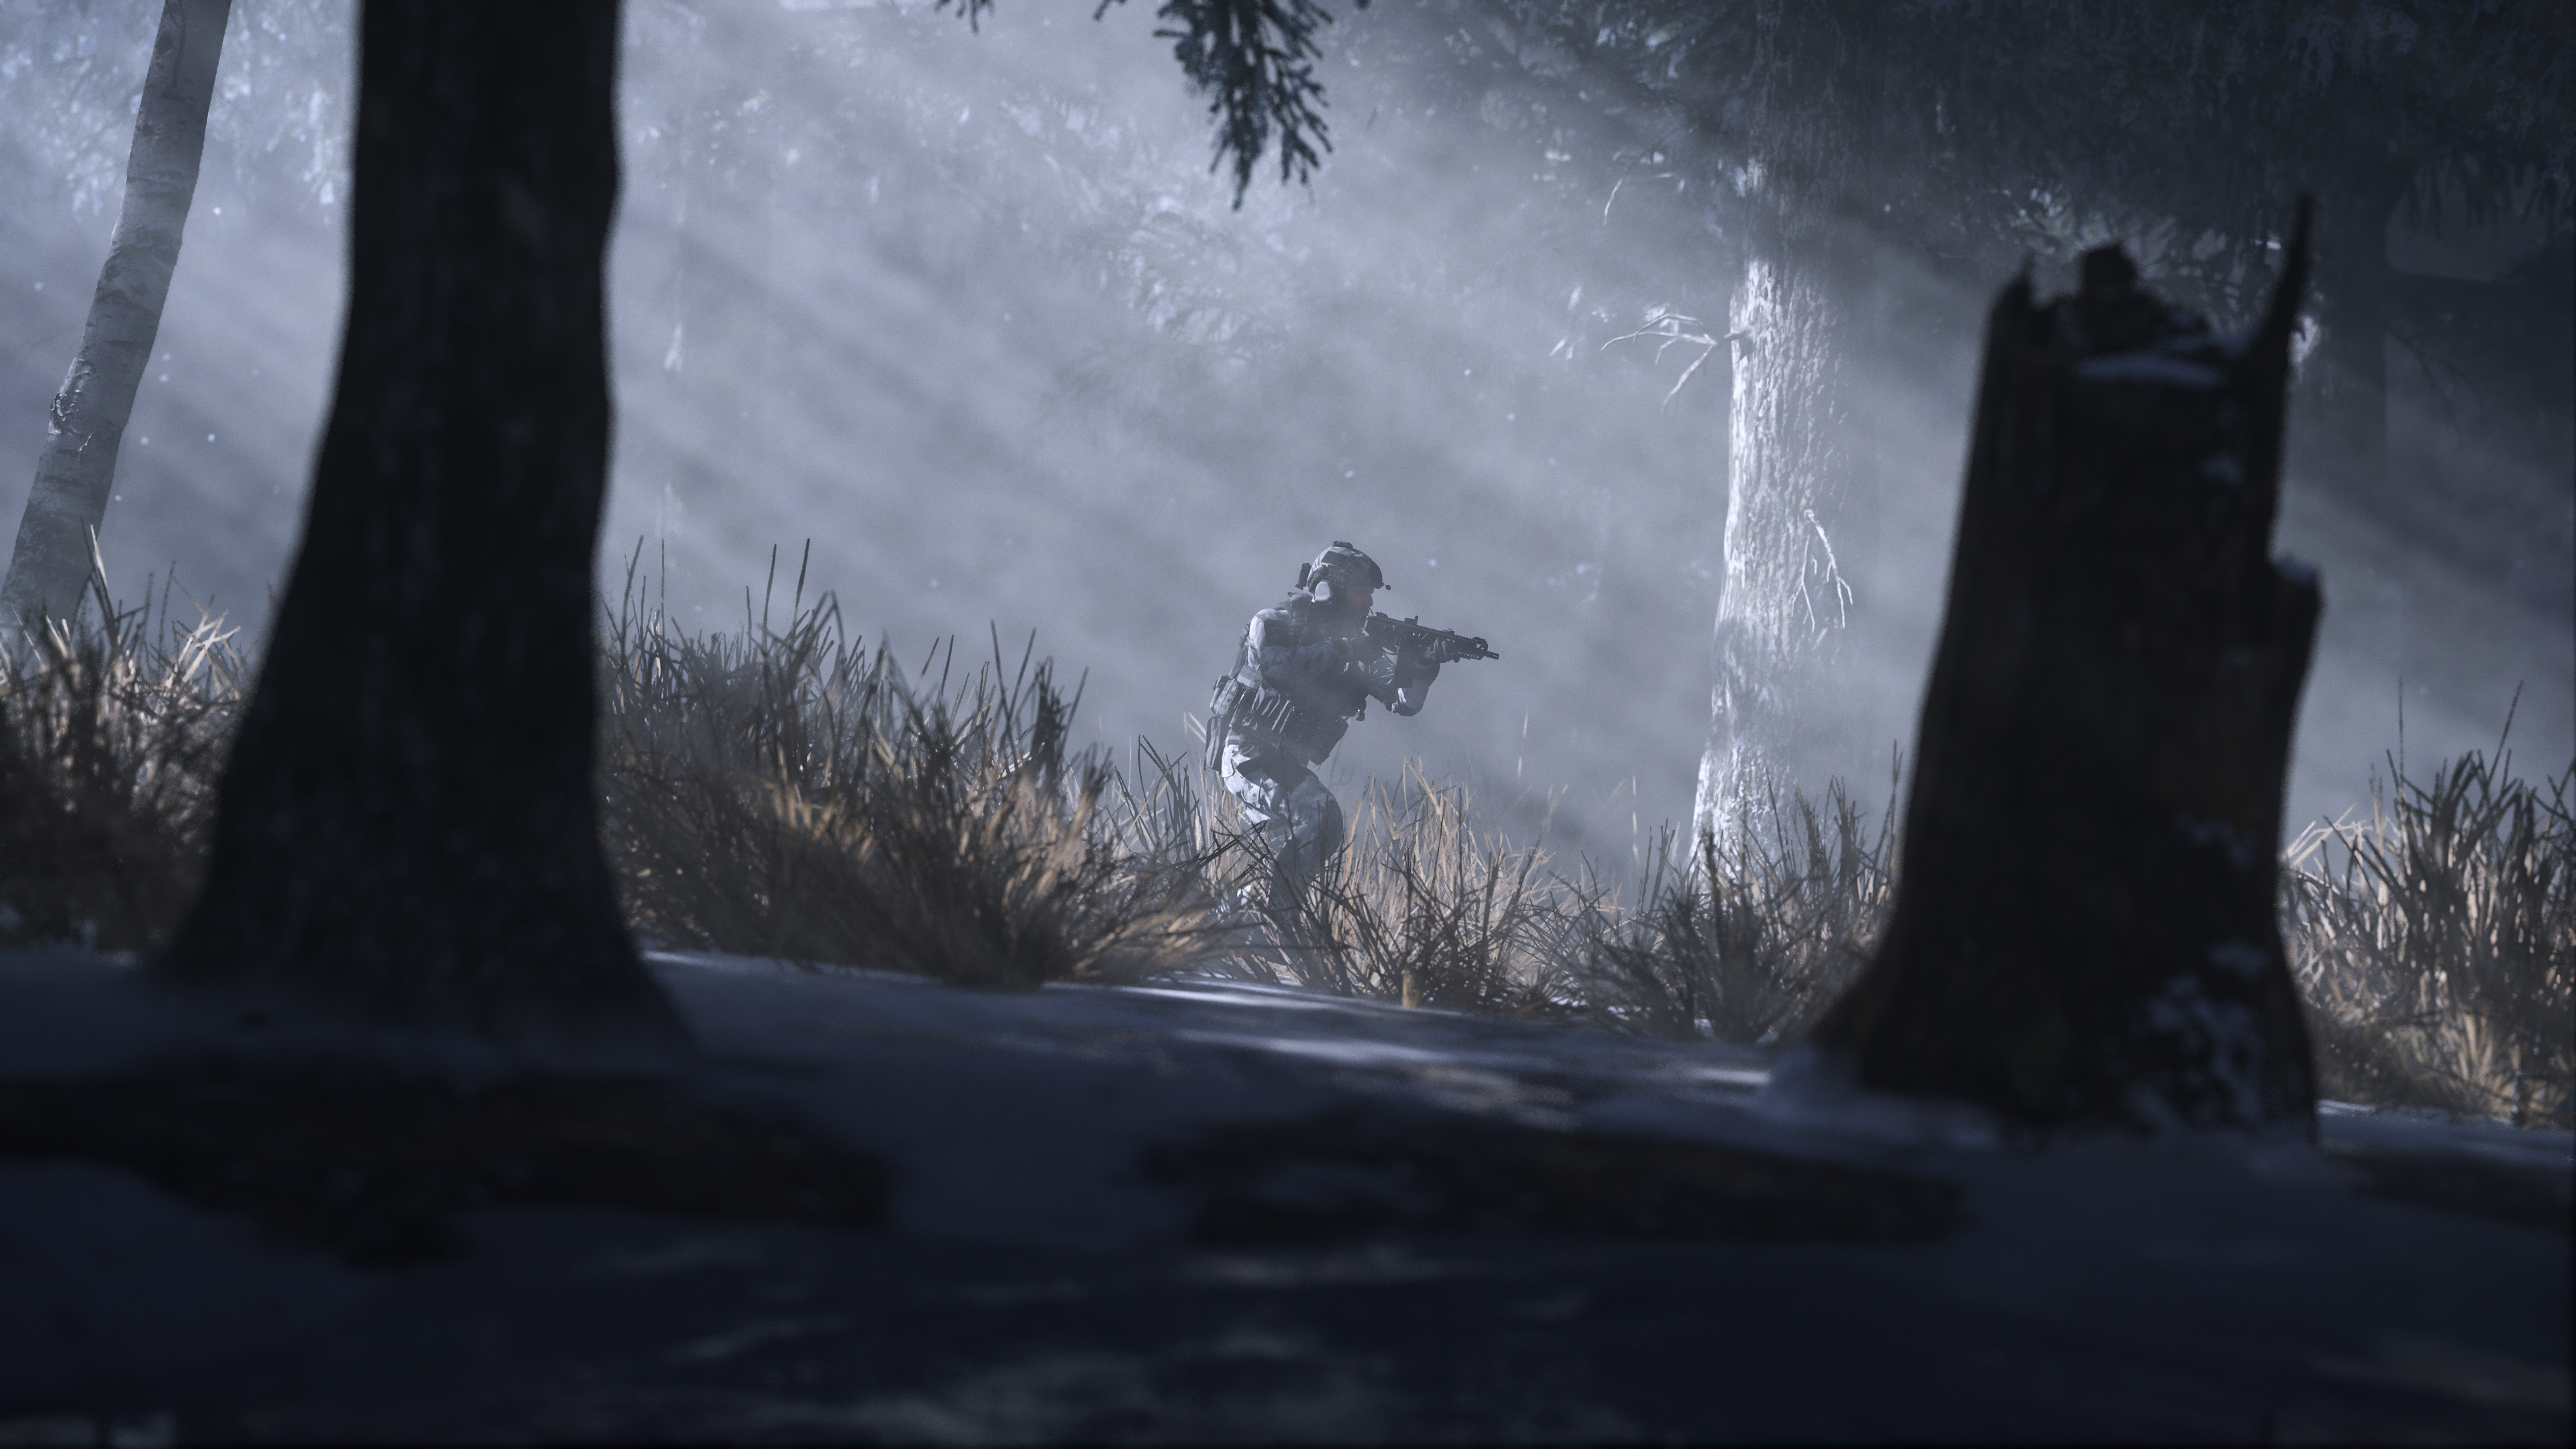 Call of Duty: Modern Warfare 3 Unveils New Warzone Map, Zombies Mode, More